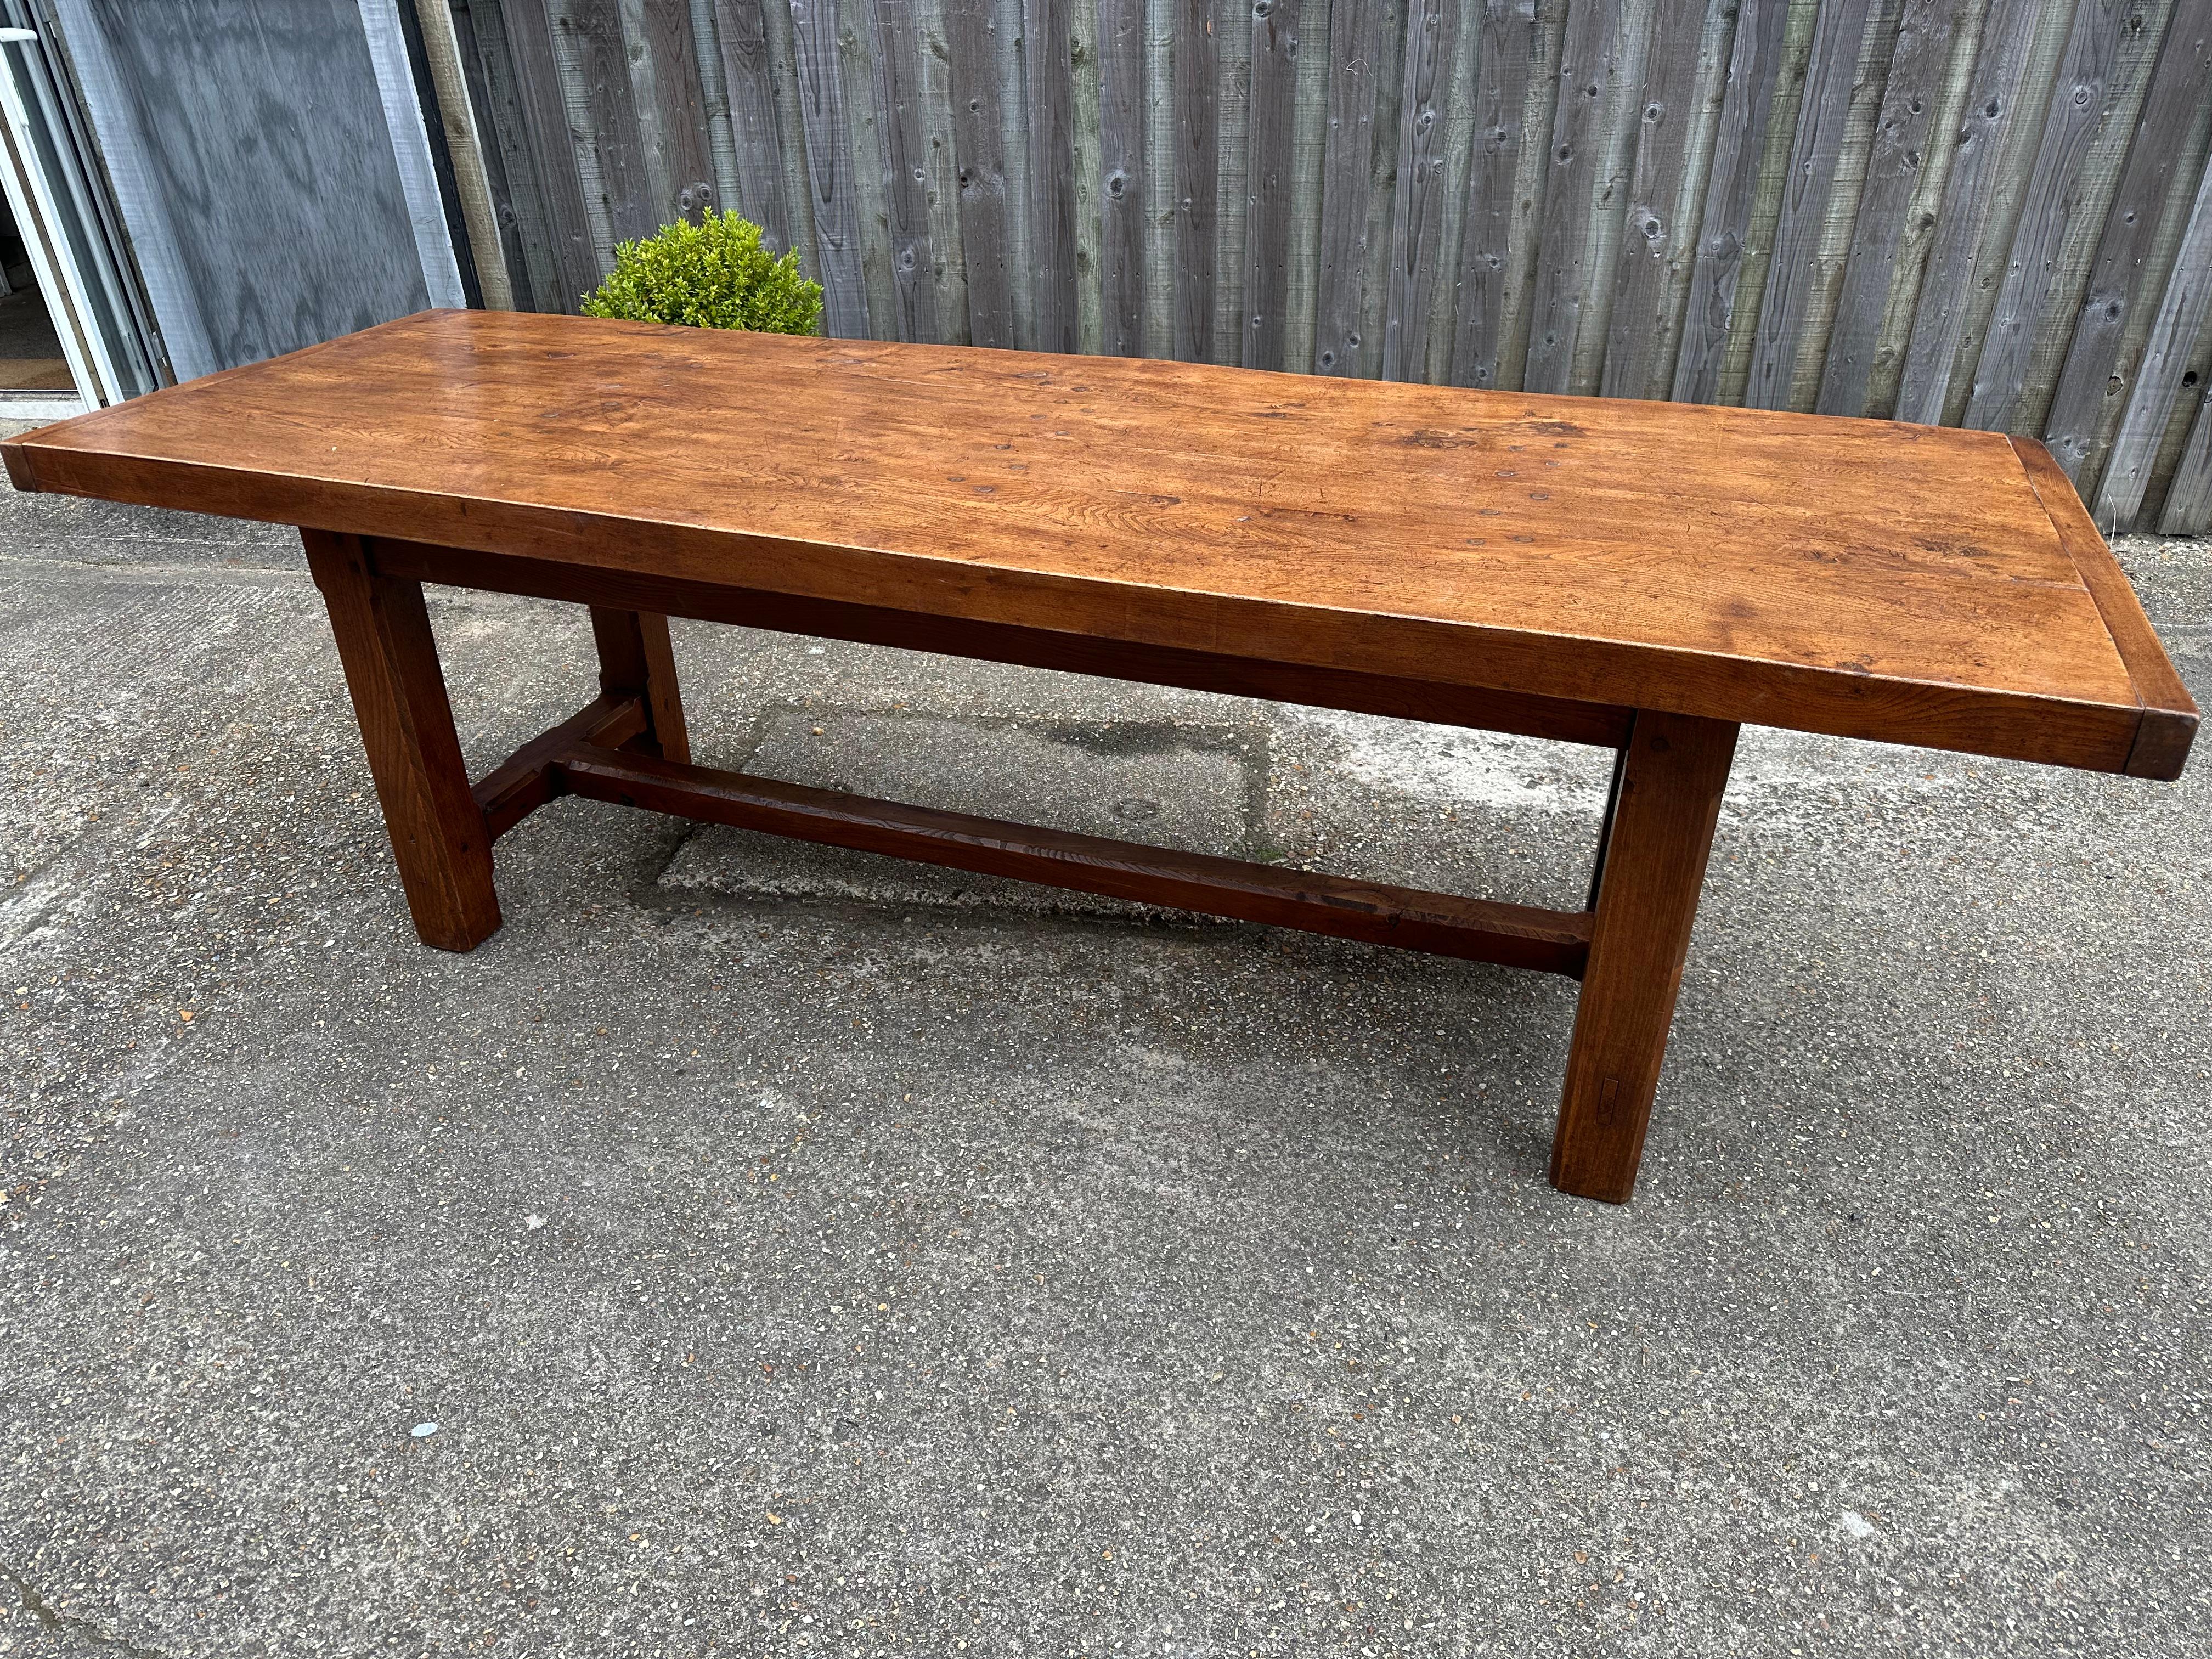 Antique Elm Farmhouse Table with a four plank top and plenty of overhang. The table has an end and centre stretcher. It has good leg room, with a sturdy base and square legs.  Gorgeous patination and colour.  This table would seat 10 people.  